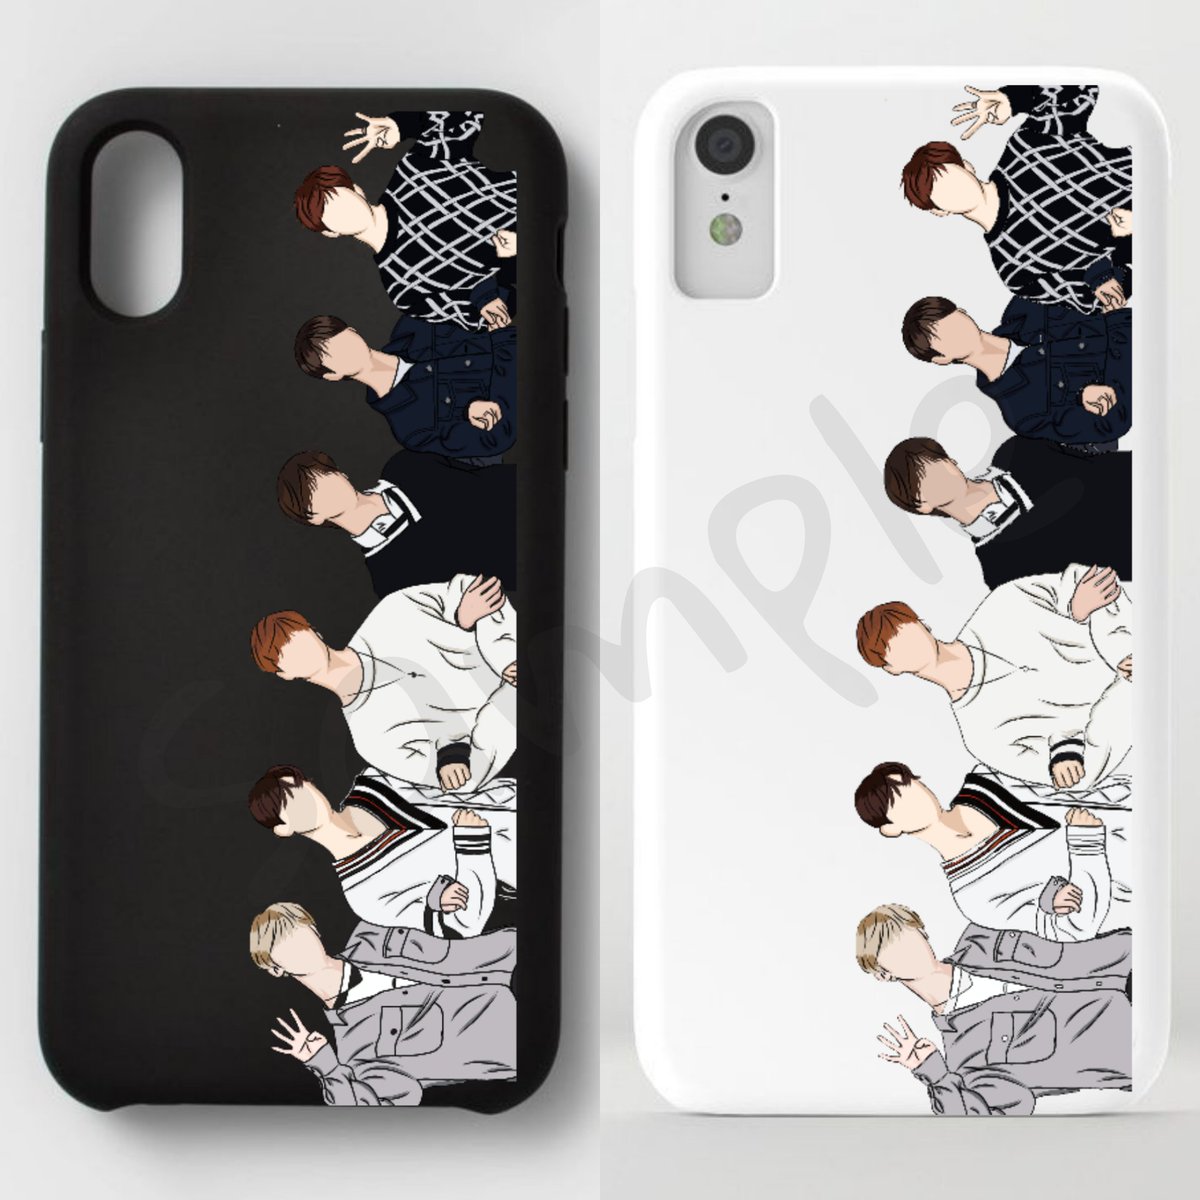 PLEASE BUY THE PHONE CASE FROM ME HAHAHA..I MADE ALL OF IT WITH LOVE..